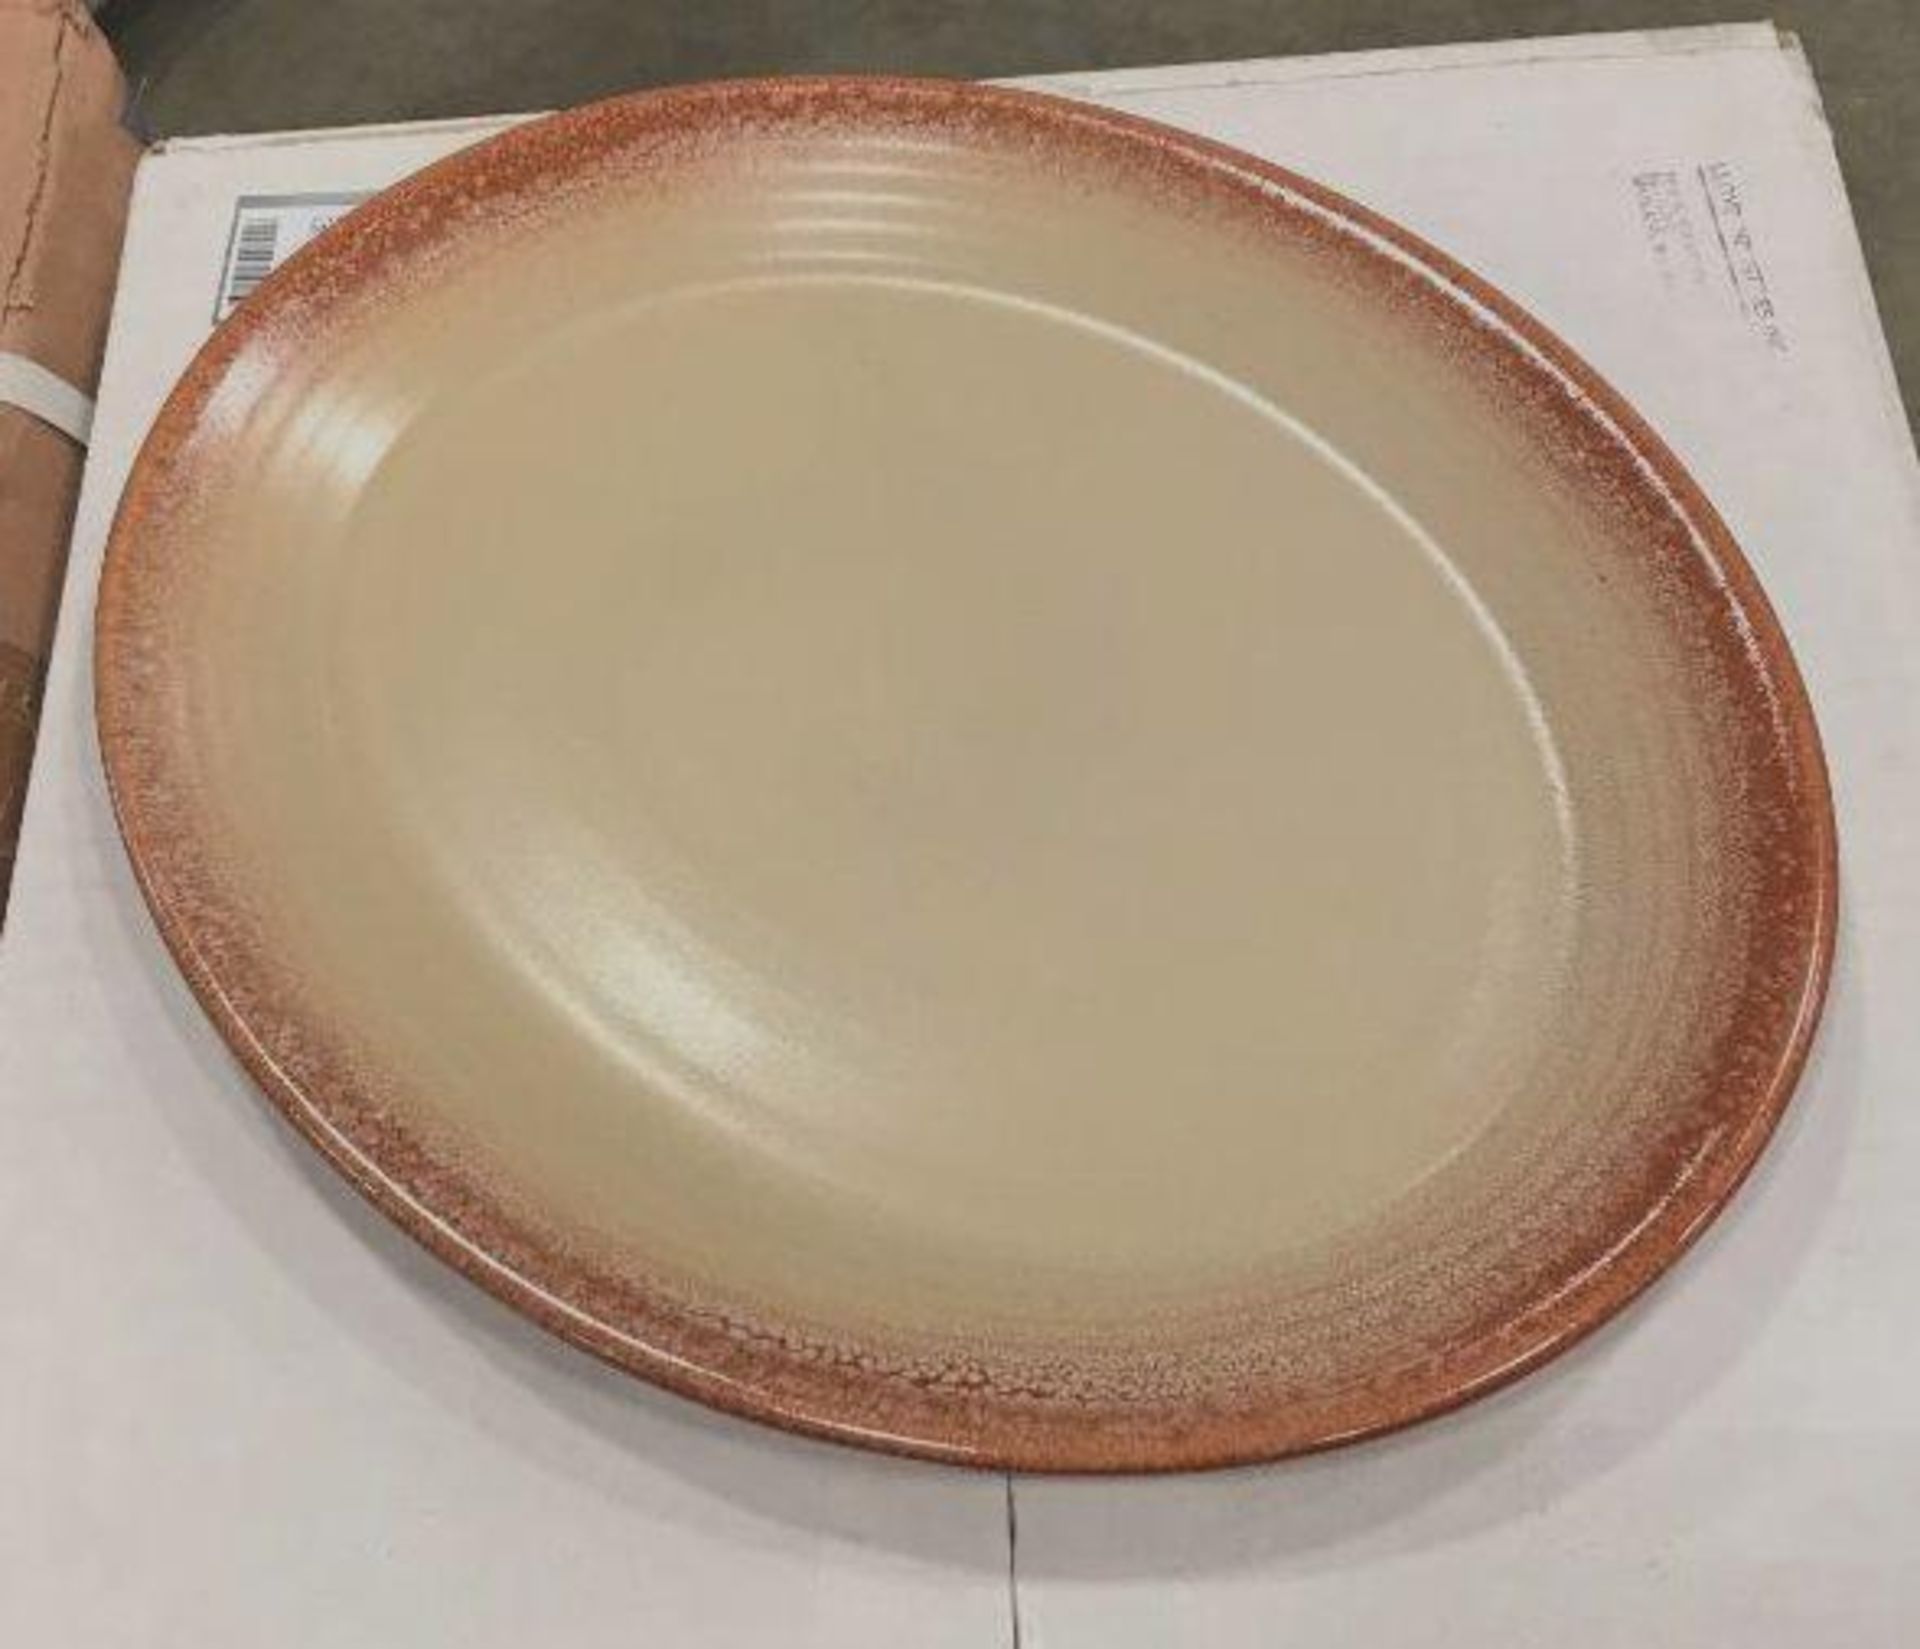 2 CASES OF DUDSON TERRACOTTA & SAND 11 1/4" OVAL PLATE - 12/CASE, MADE IN ENGLAND - Image 2 of 4